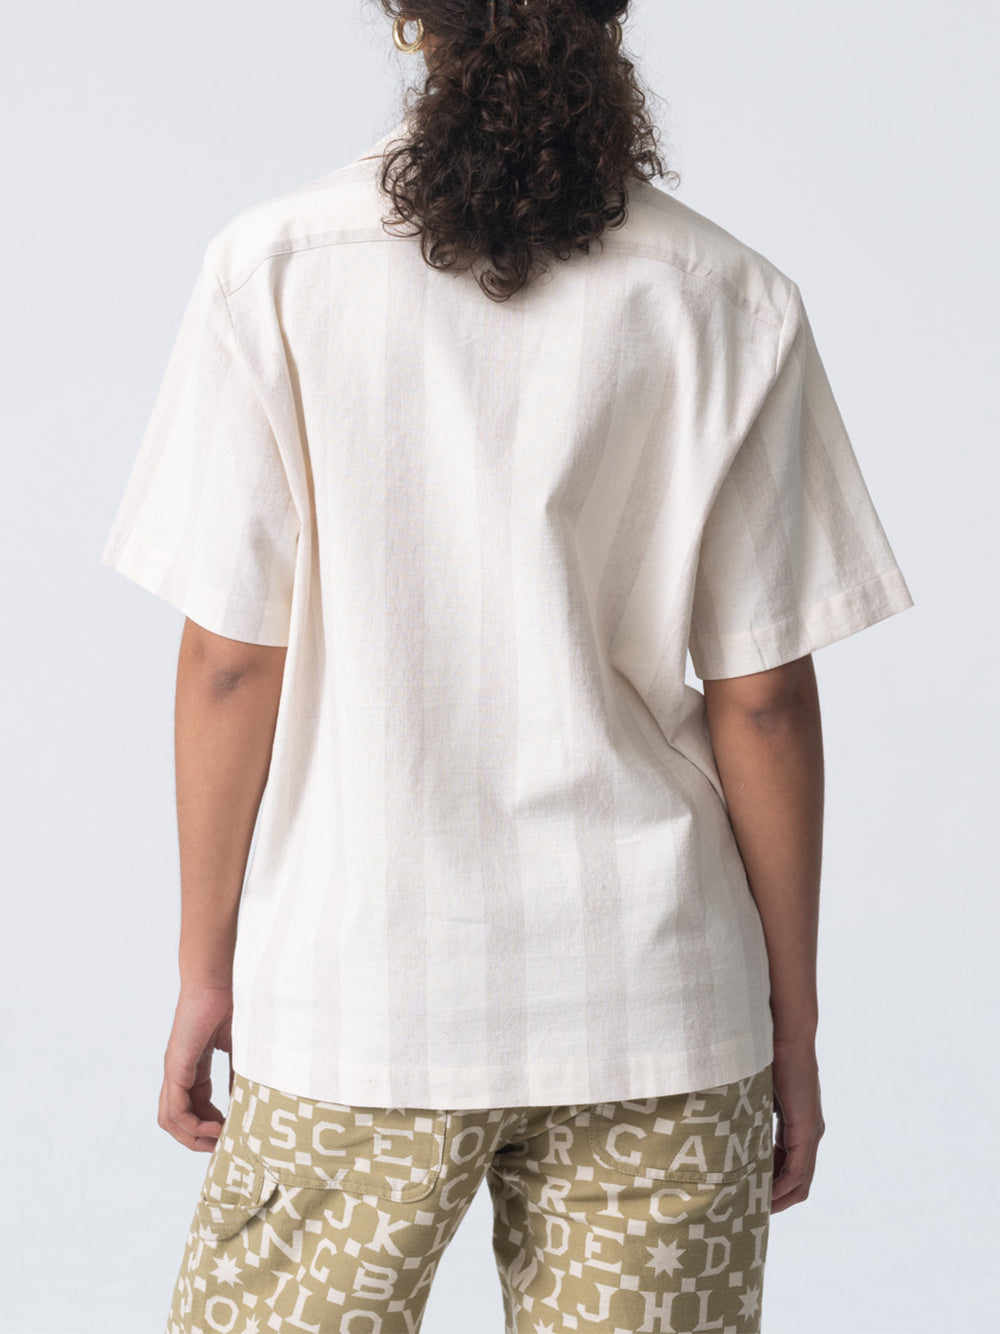 Short sleeved shirt with bird embroidery